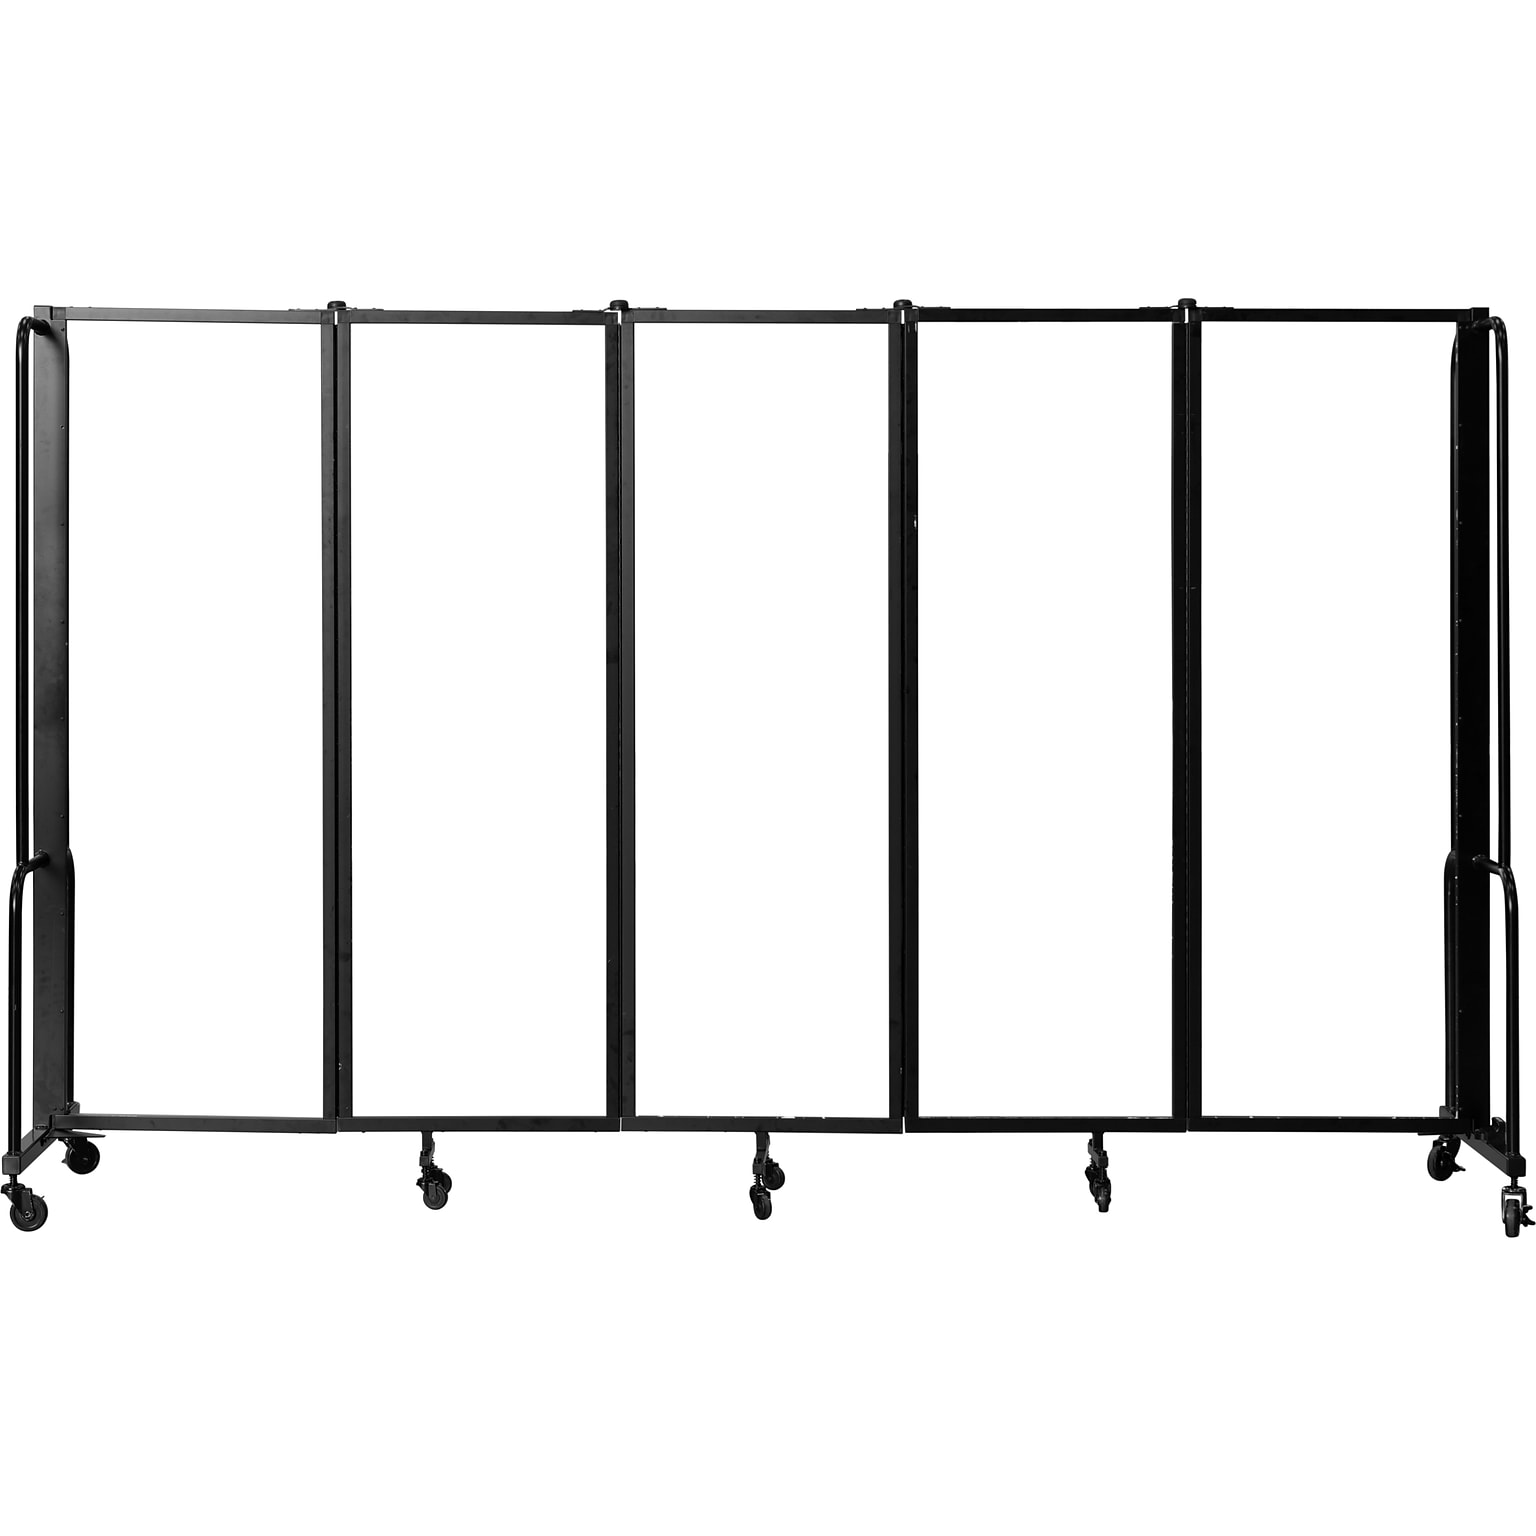 National Public Seating Robo Freestanding 5-Panel Room Divider, 72H x 118W, Clear Acrylic (RDB6-5CA)